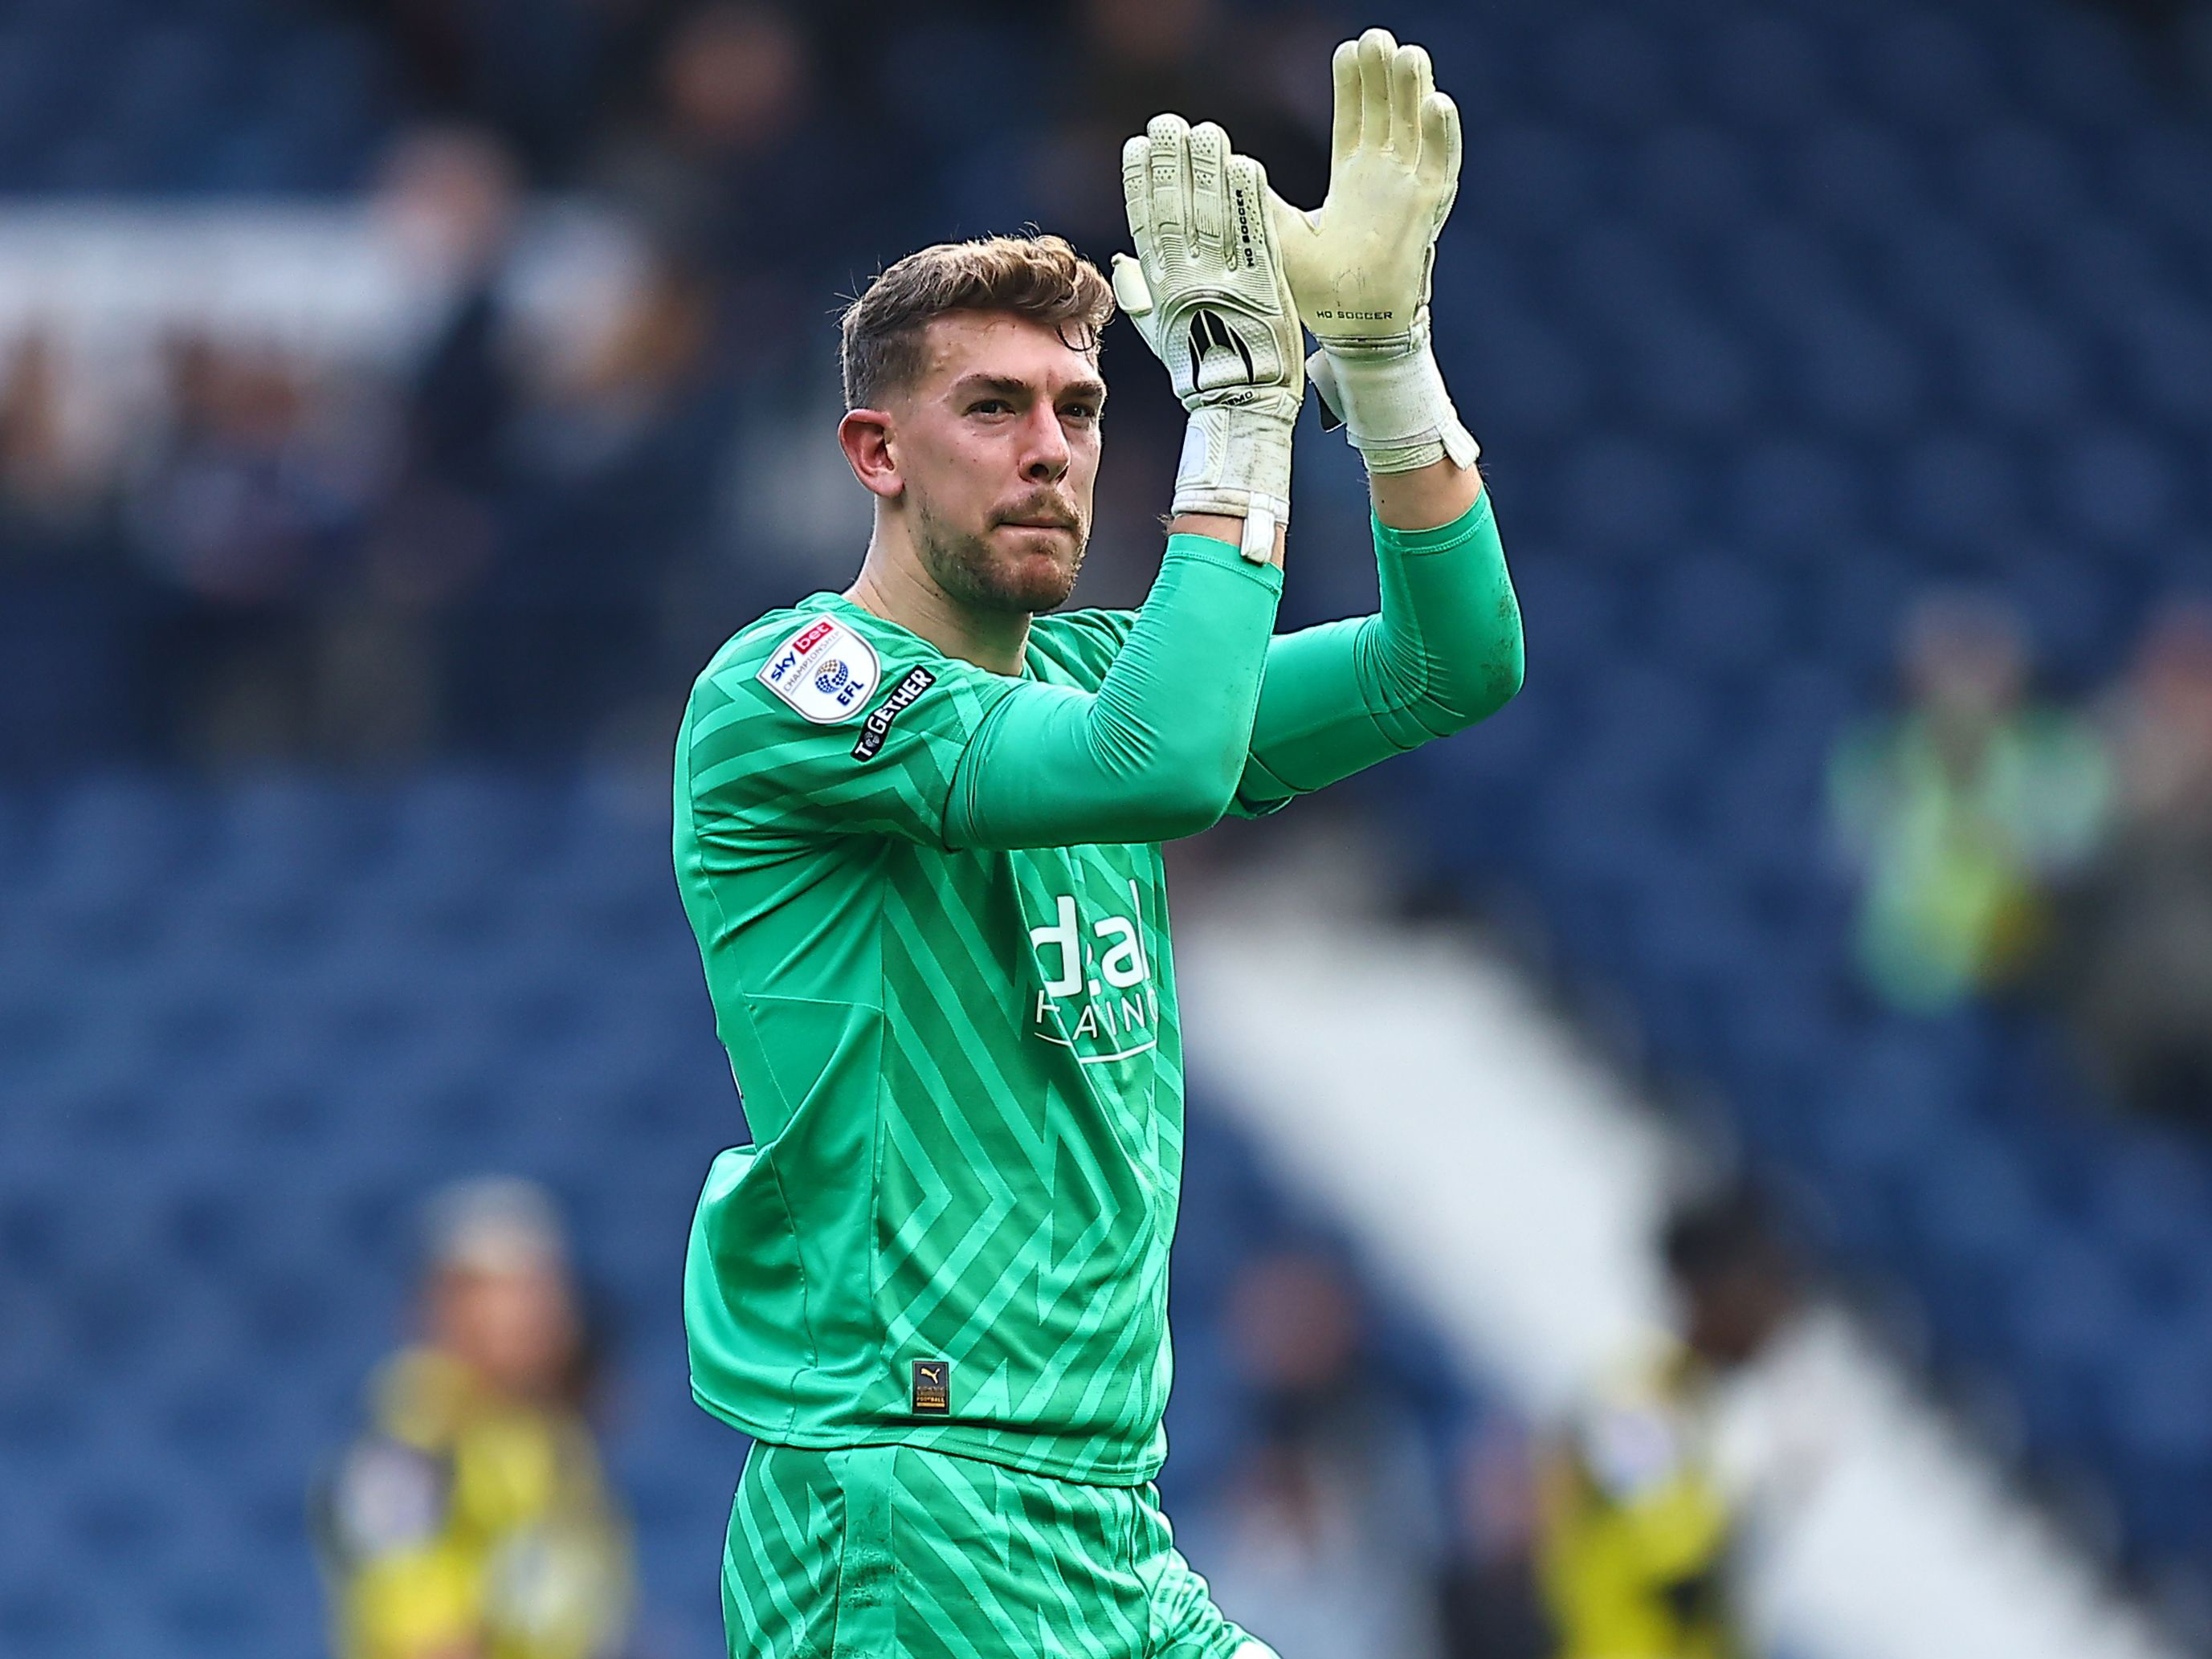 Alex Palmer applauding supporters after the Watford game